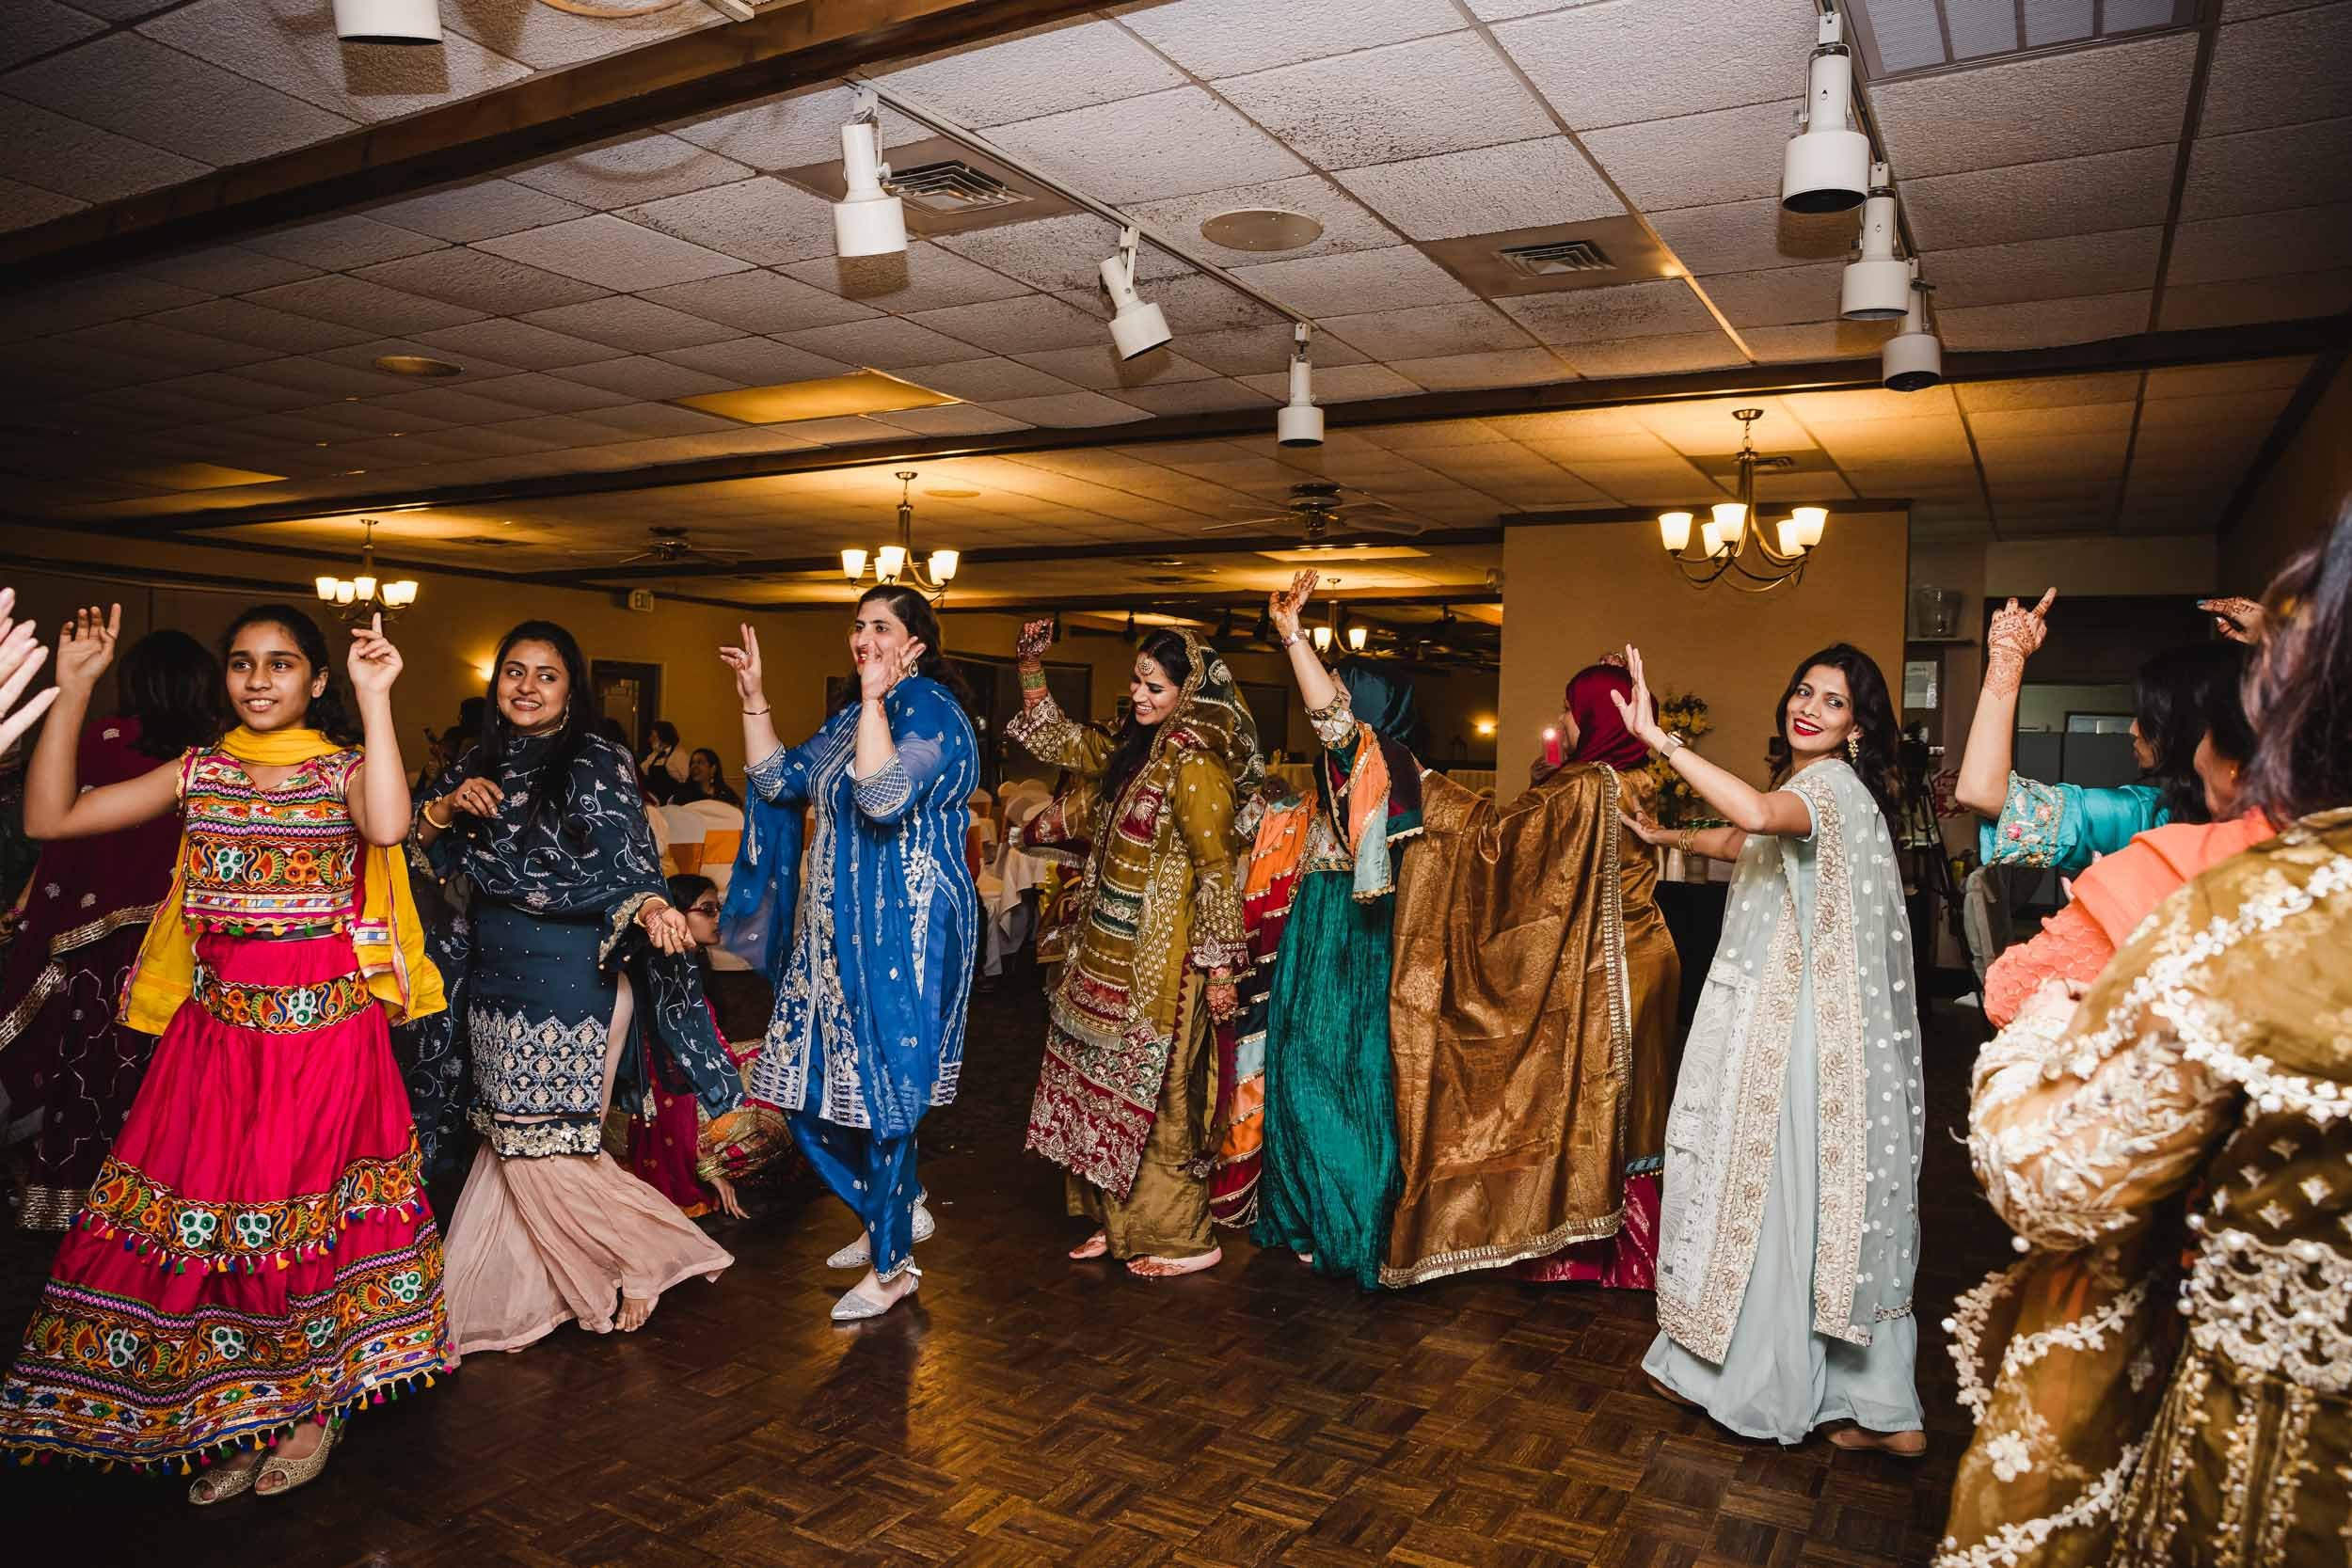 Henna Dance Party at Barrack's Cater Inn